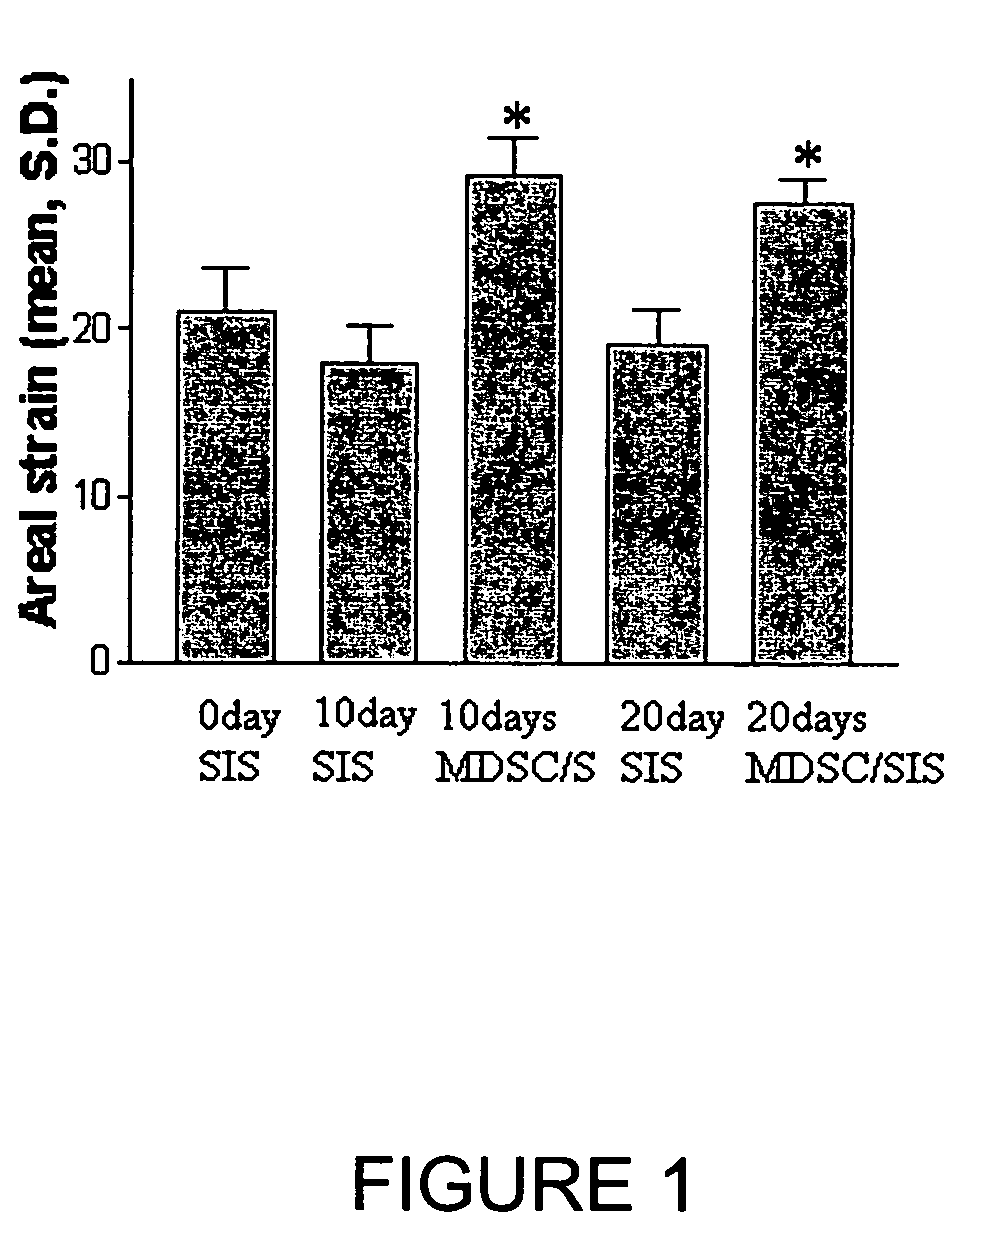 Rapid preparation of stem cell matrices for use in tissue and organ treatment and repair